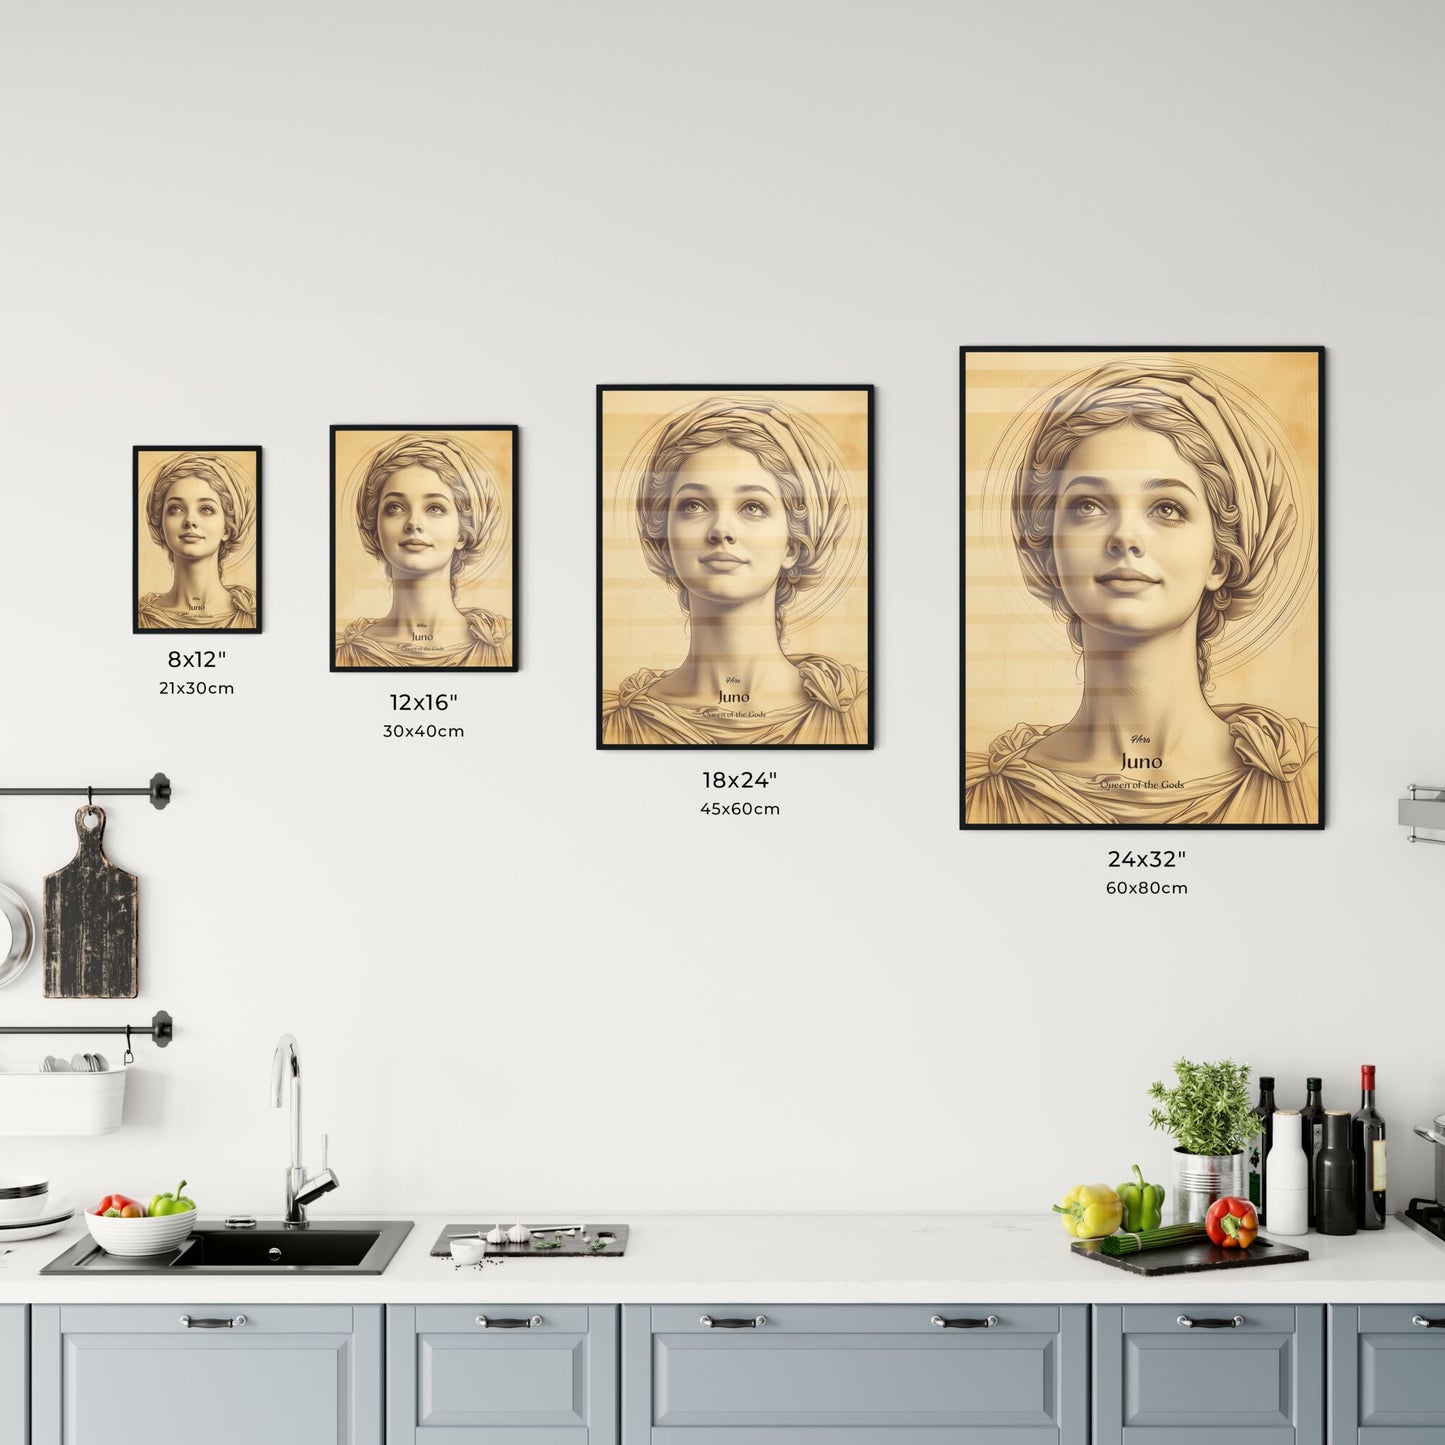 Hera, Juno, Queen of the Gods, A Poster of a drawing of a woman Default Title